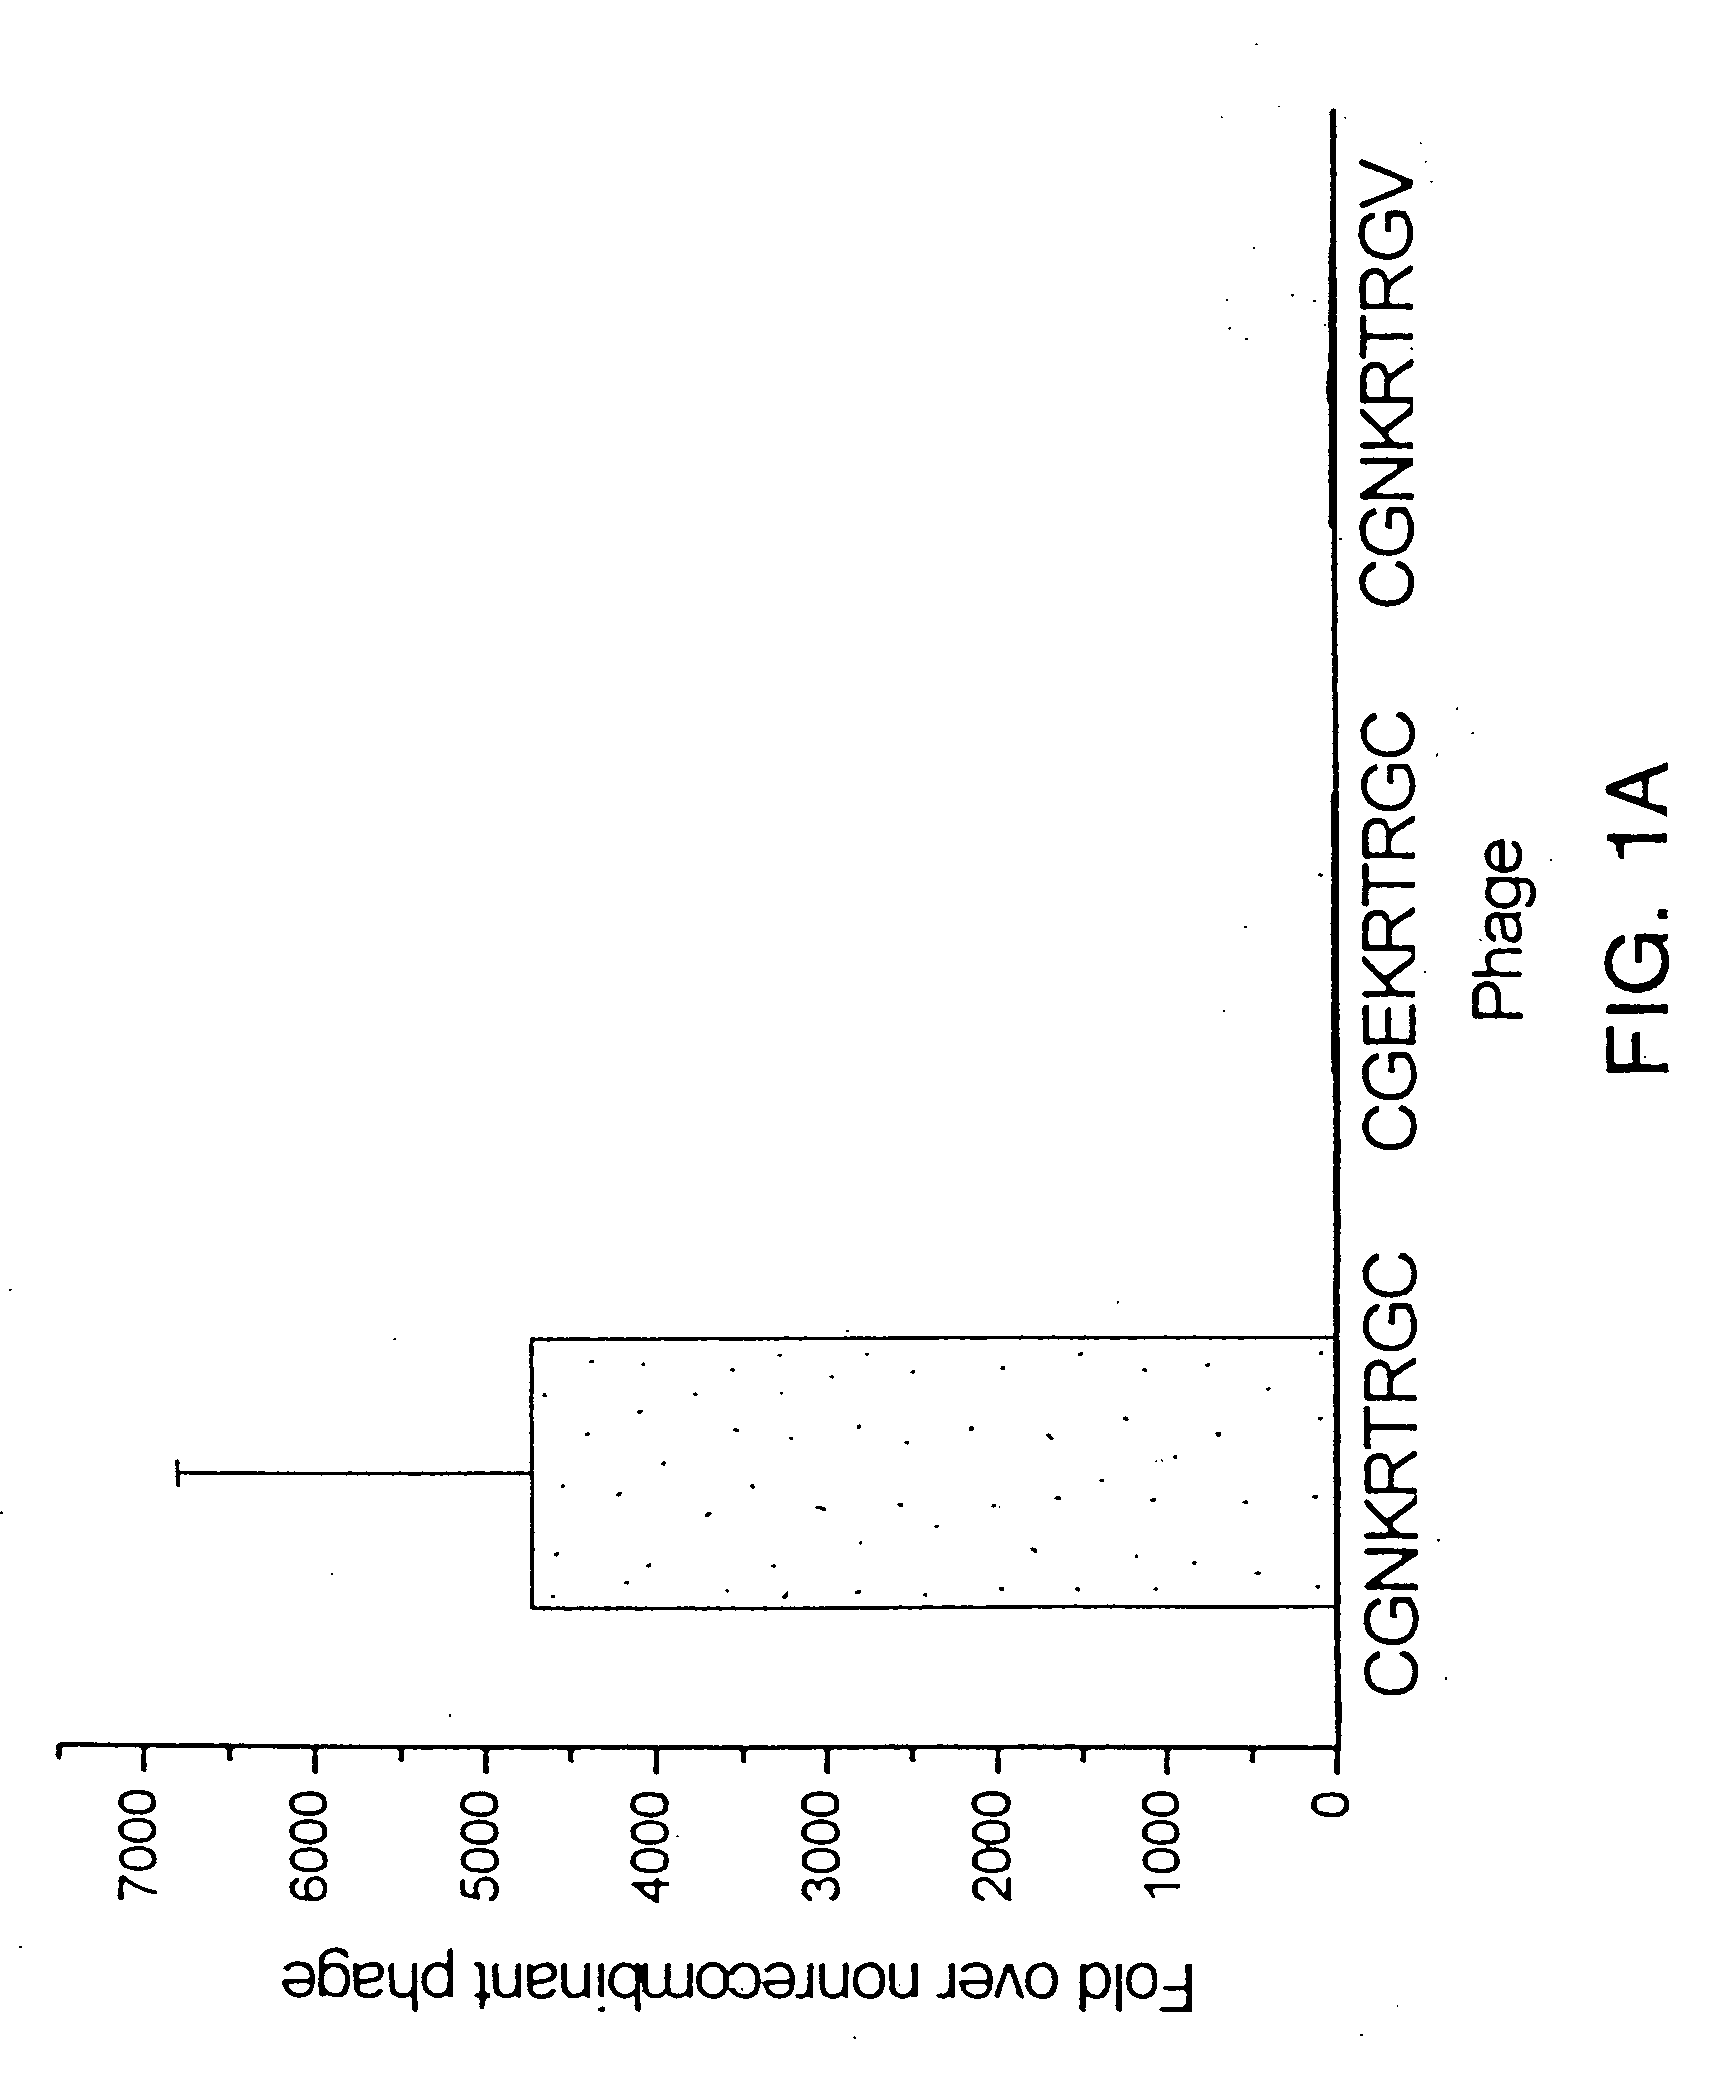 Peptides that home to tumor lymphatic vasculature and methods of using same